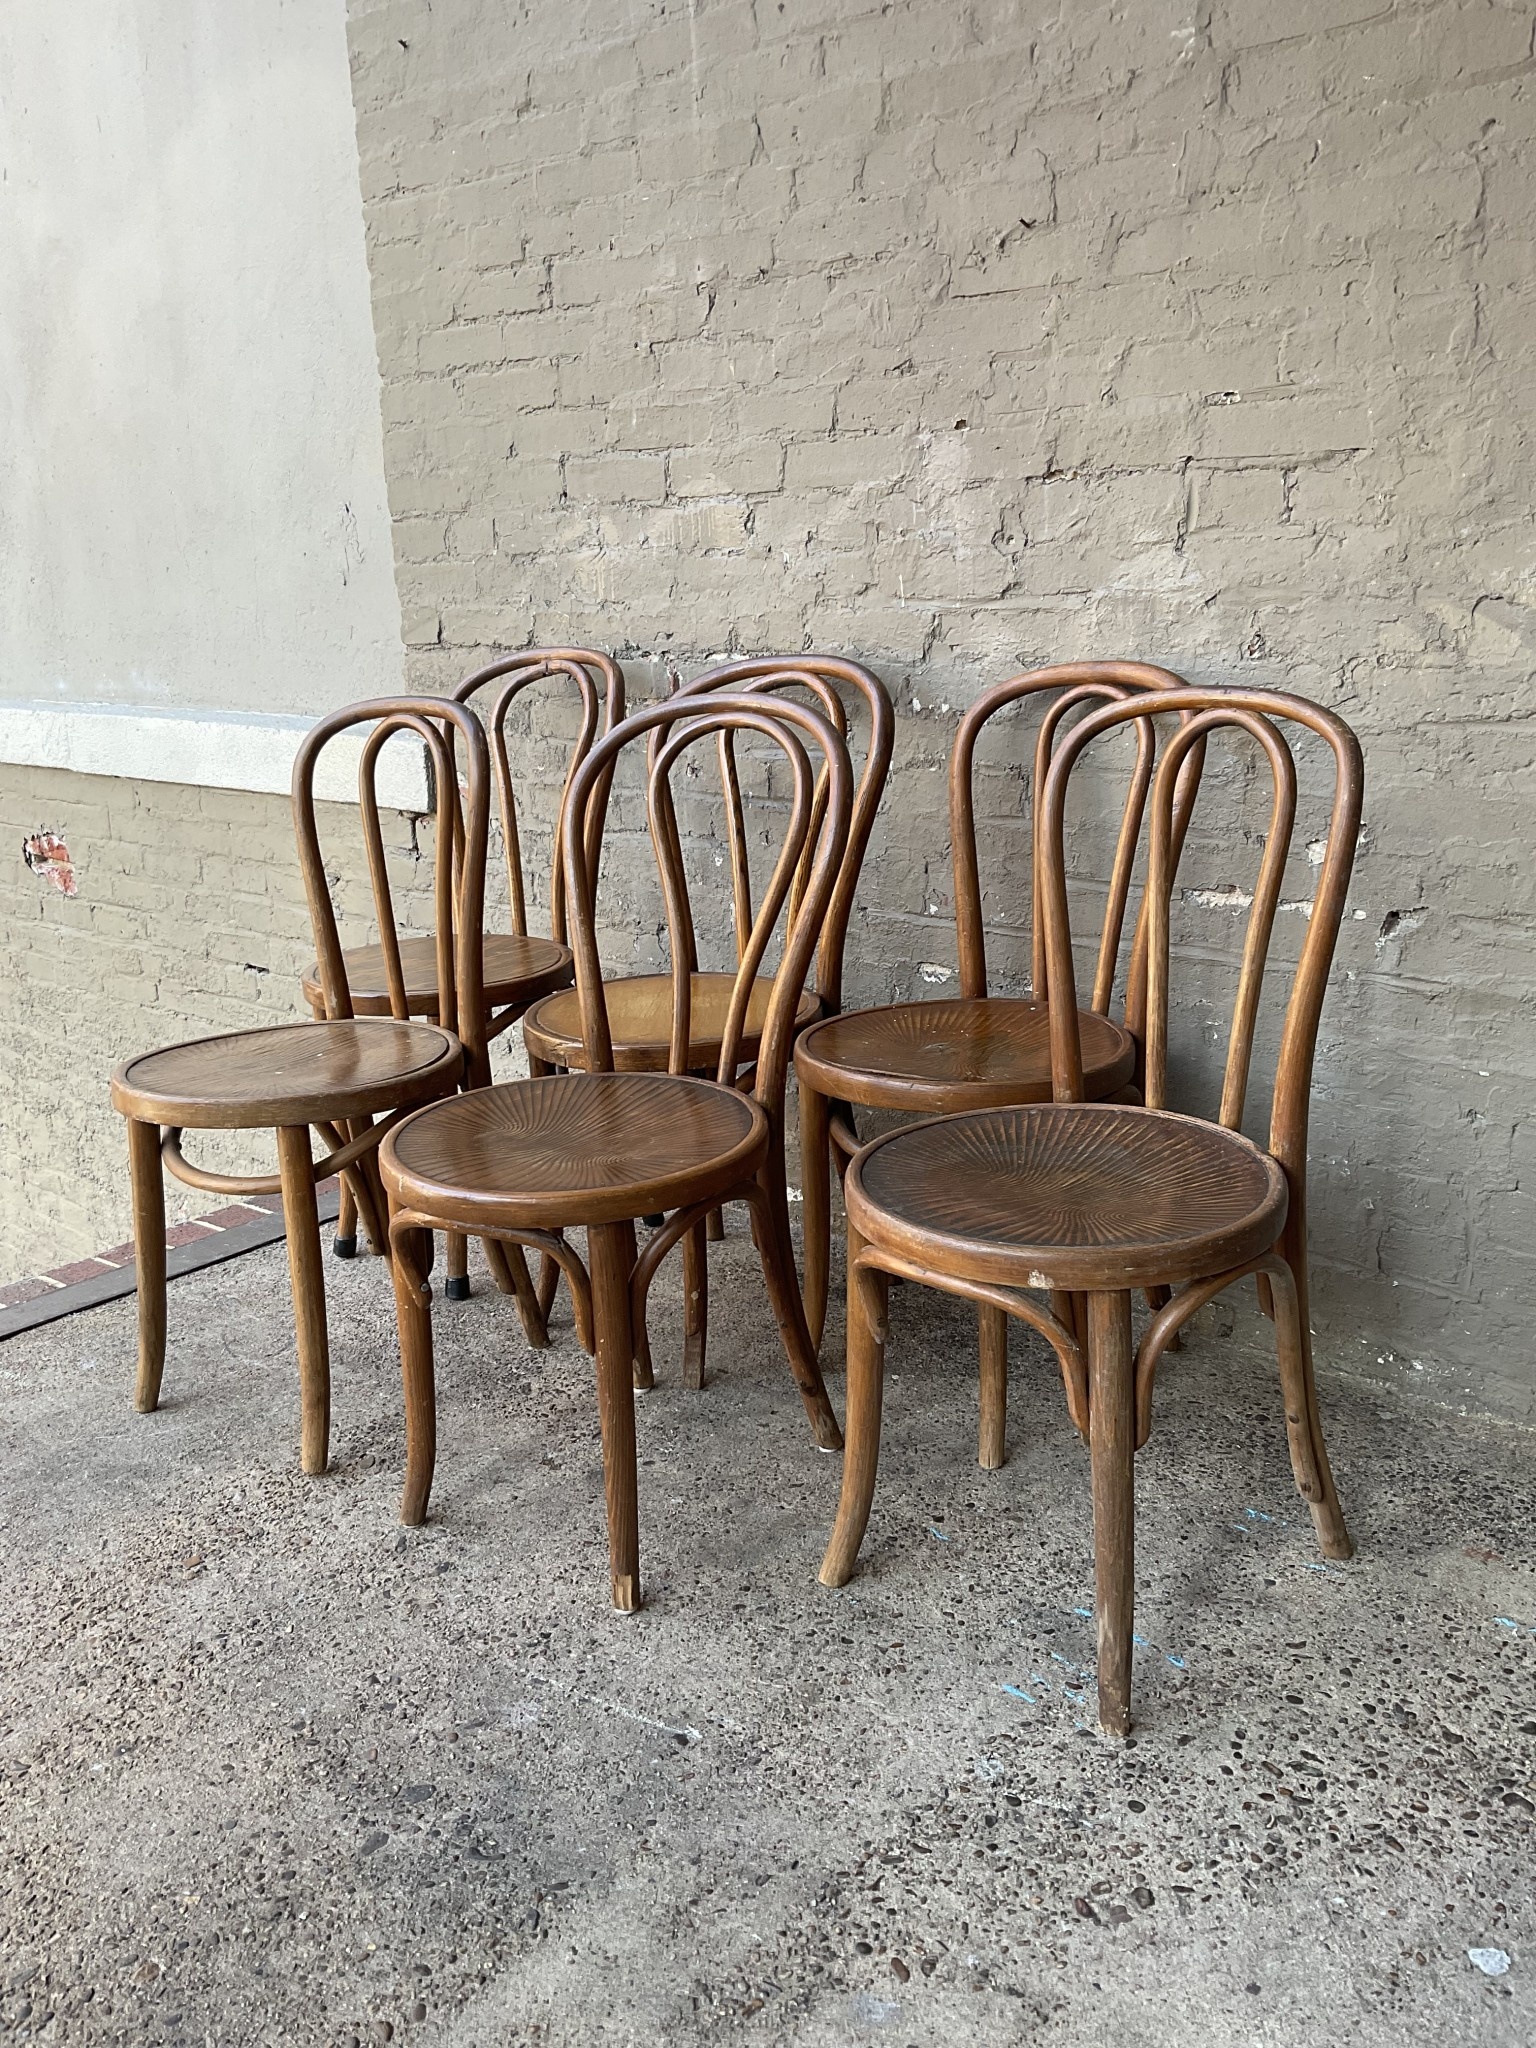 Set of 6 Bentwood Chairs, Some Repairs